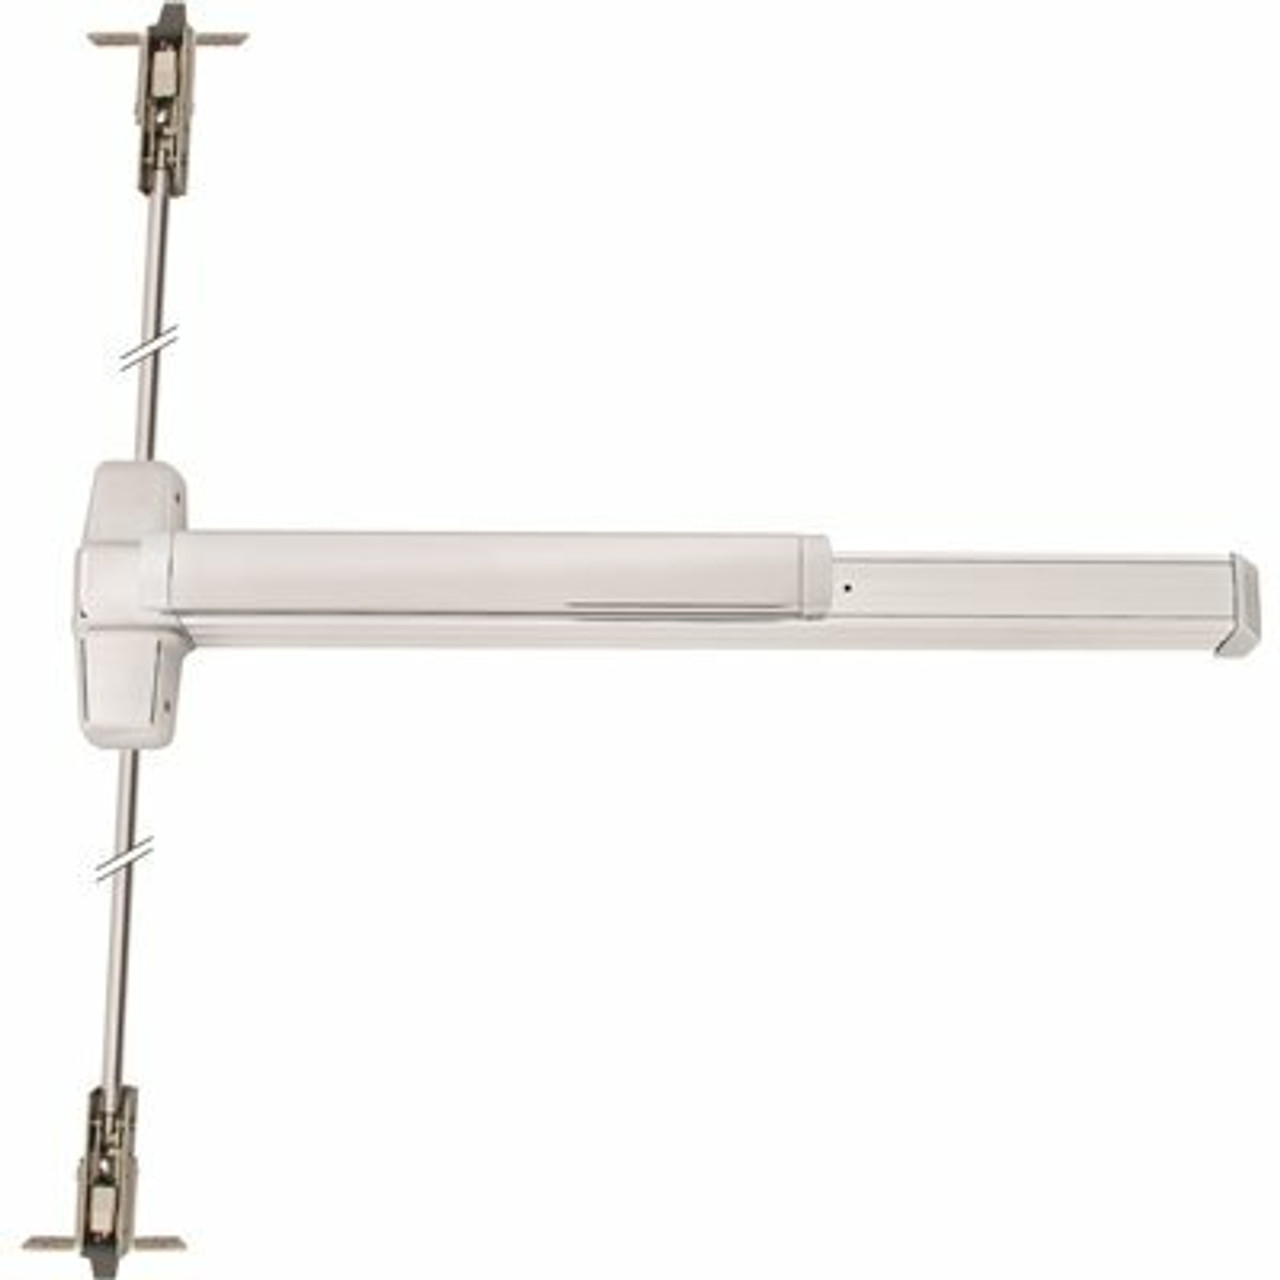 Von Duprin Grade-1 Satin Chrome Concealed Vertical Rod Exit Device, Non-Handed, Exit Only - 310013184